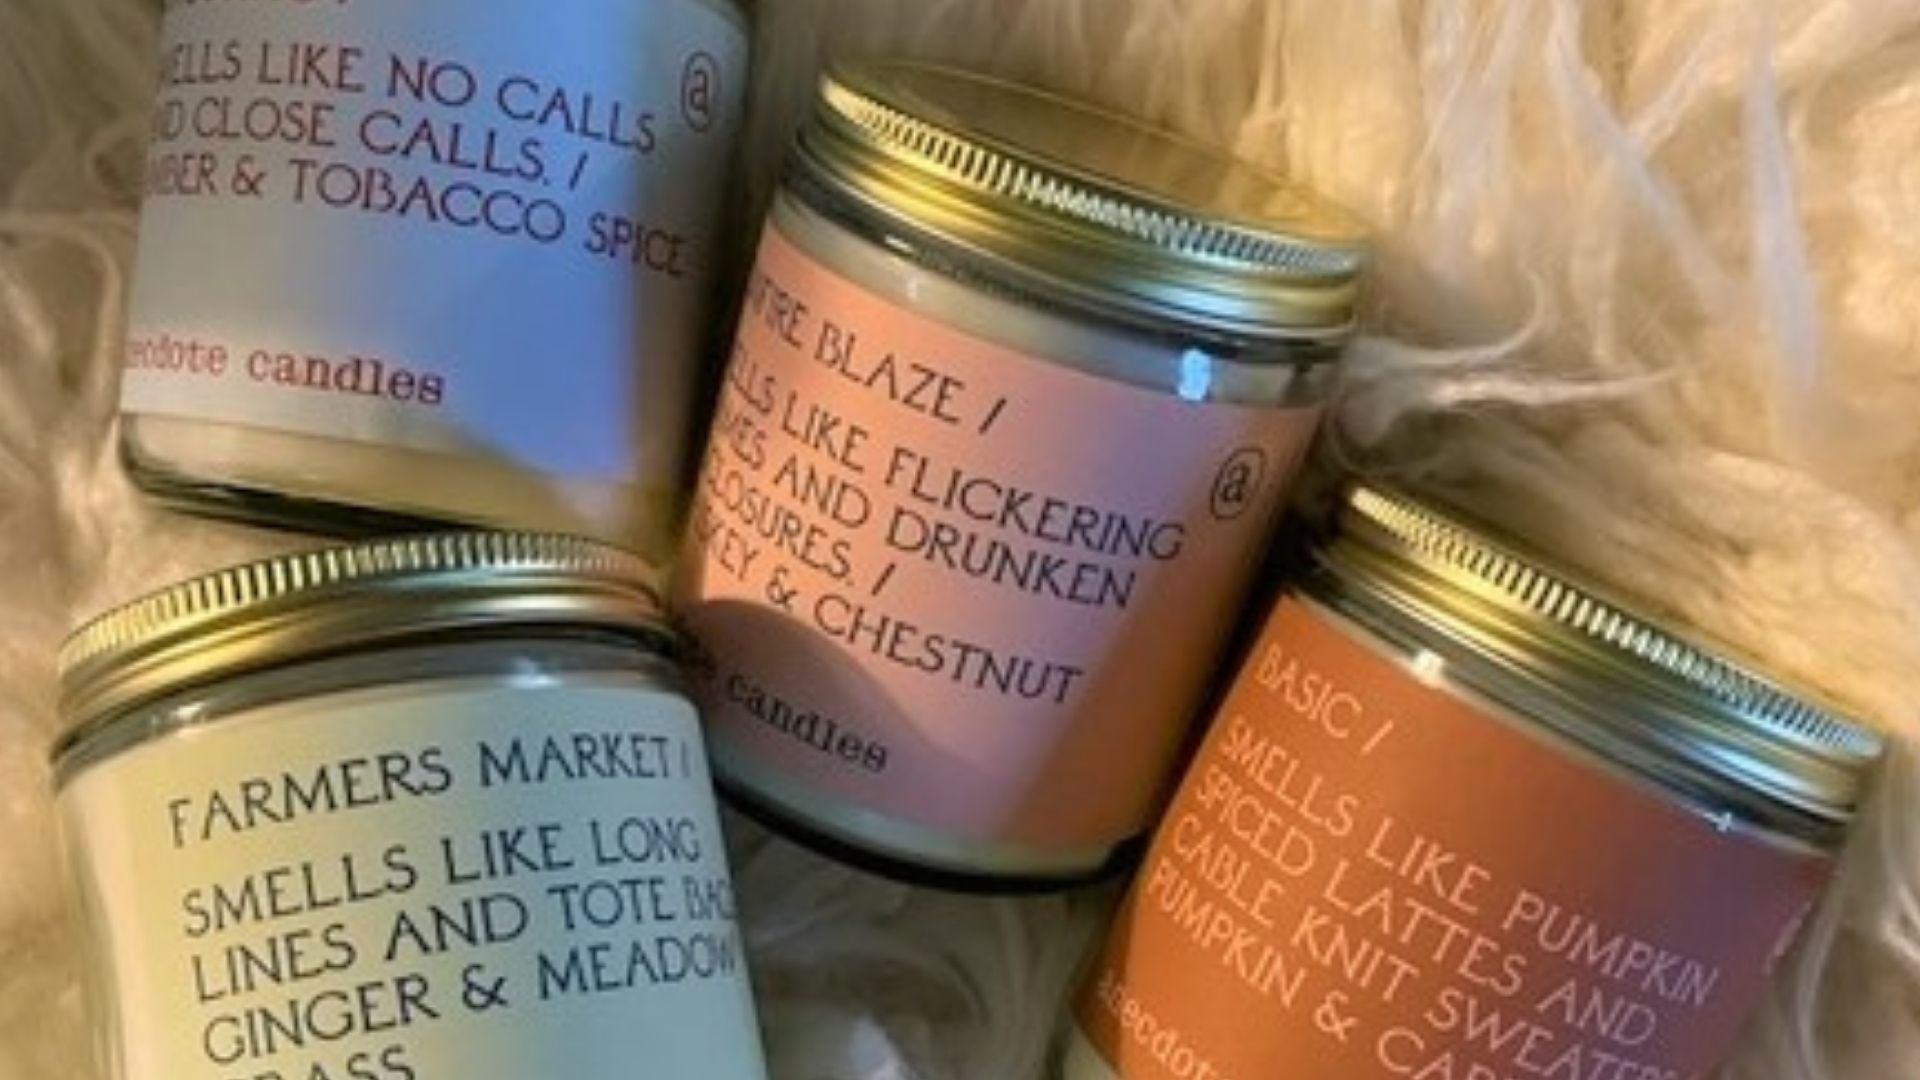 review, photos, ingredients, trends, 2021, 2022, candles, fragrance, scents, home scents, anecdote candles, luxury candles, basic, bonfize blaze, farmers market, ghosting, coconut-soy wax, hand-poured candles